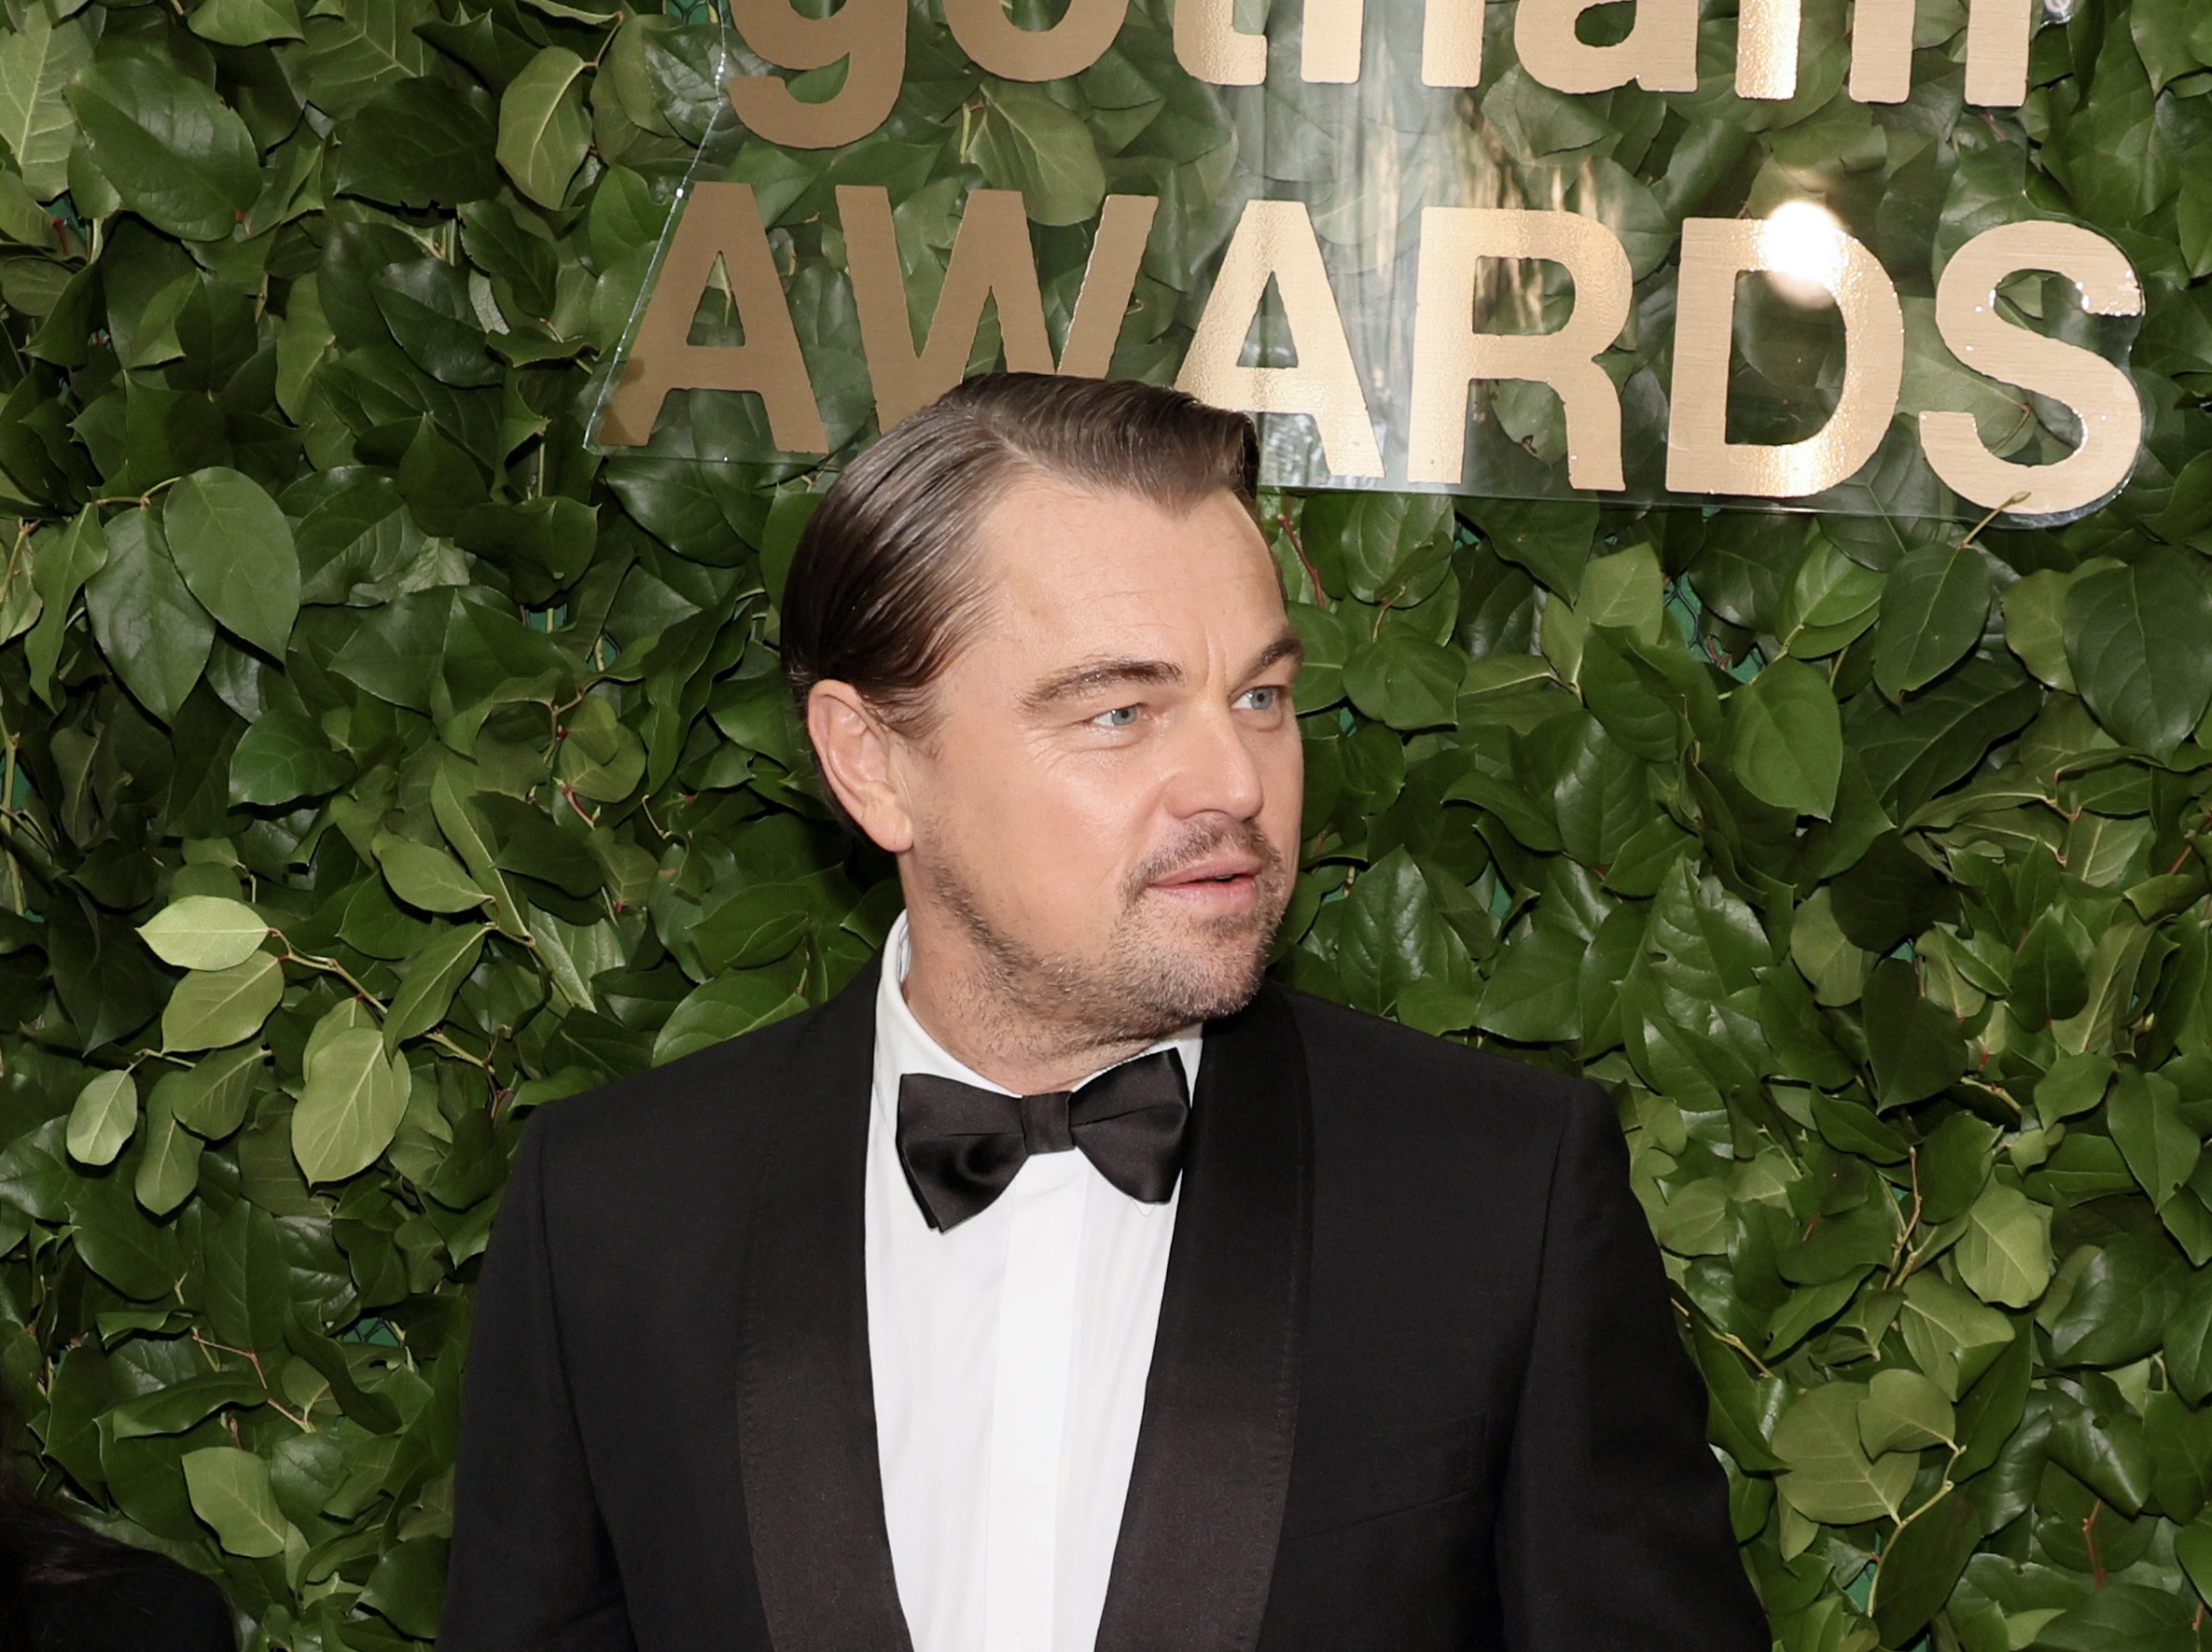 Leonardo DiCaprio attends the 33rd Annual Gotham Awards, dressed in a classic black tuxedo with a bow tie, against a backdrop of lush green foliage.